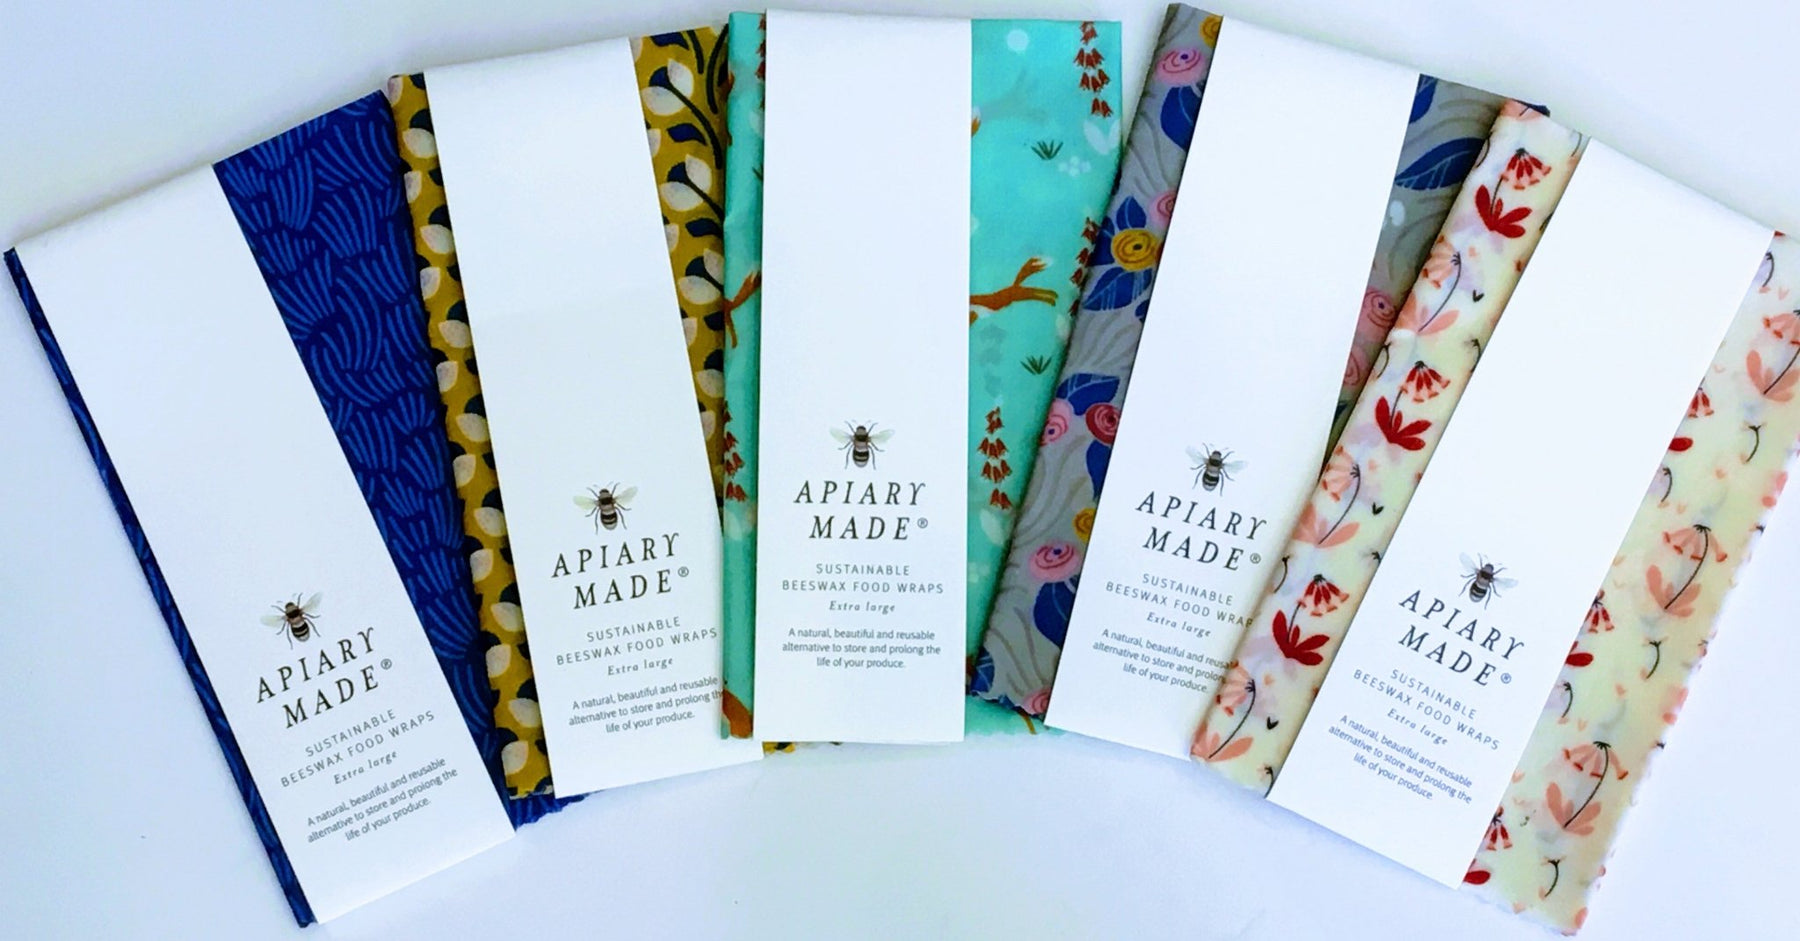 Apiary Made Sustainable Beeswax Food Wraps Extra Large